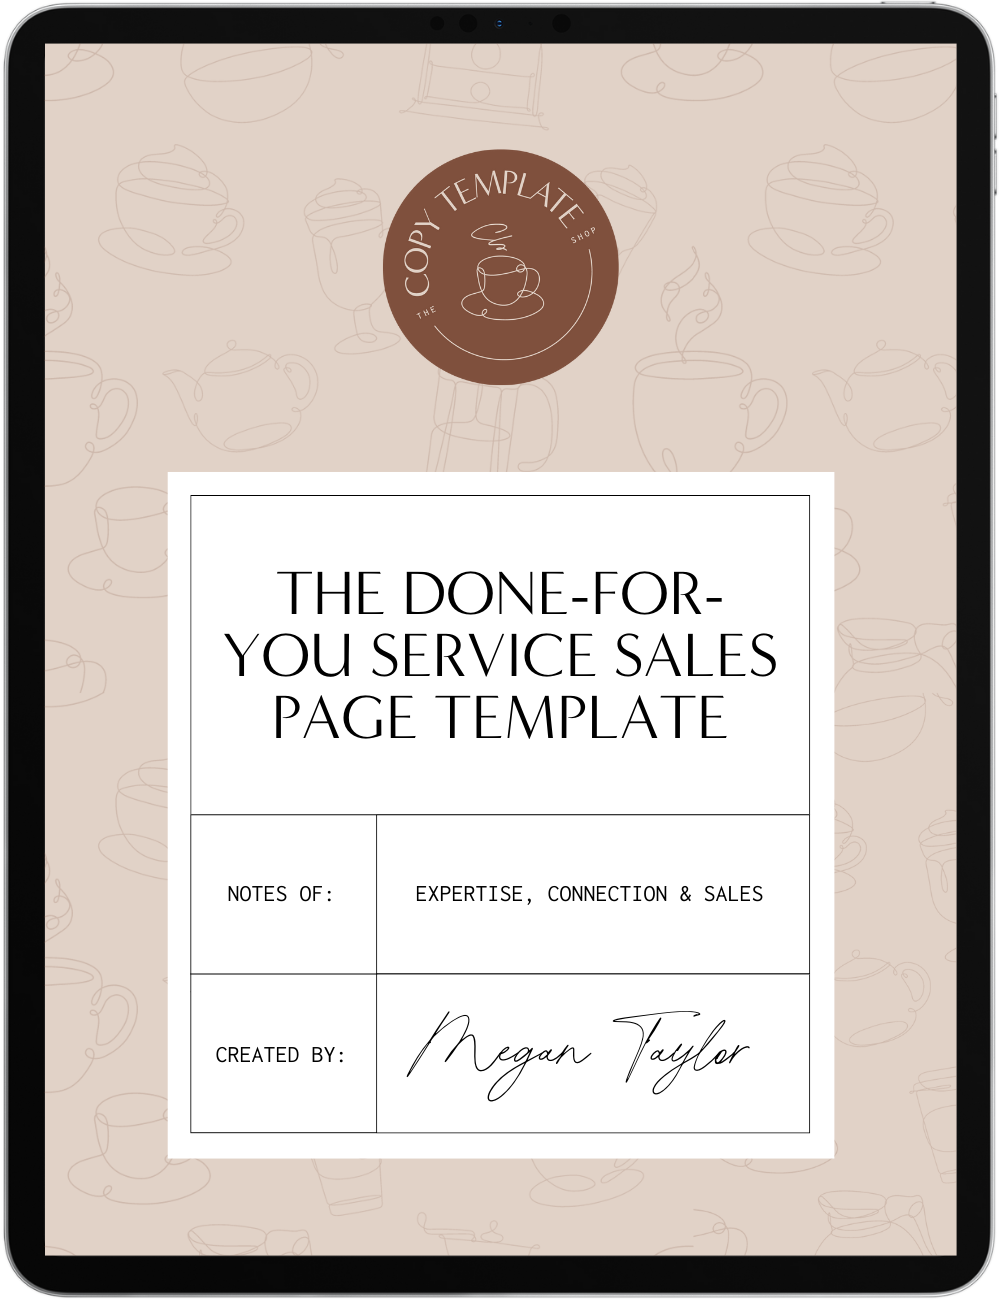 sales page template for done-for-you services by the copy template shop shown on a tablet